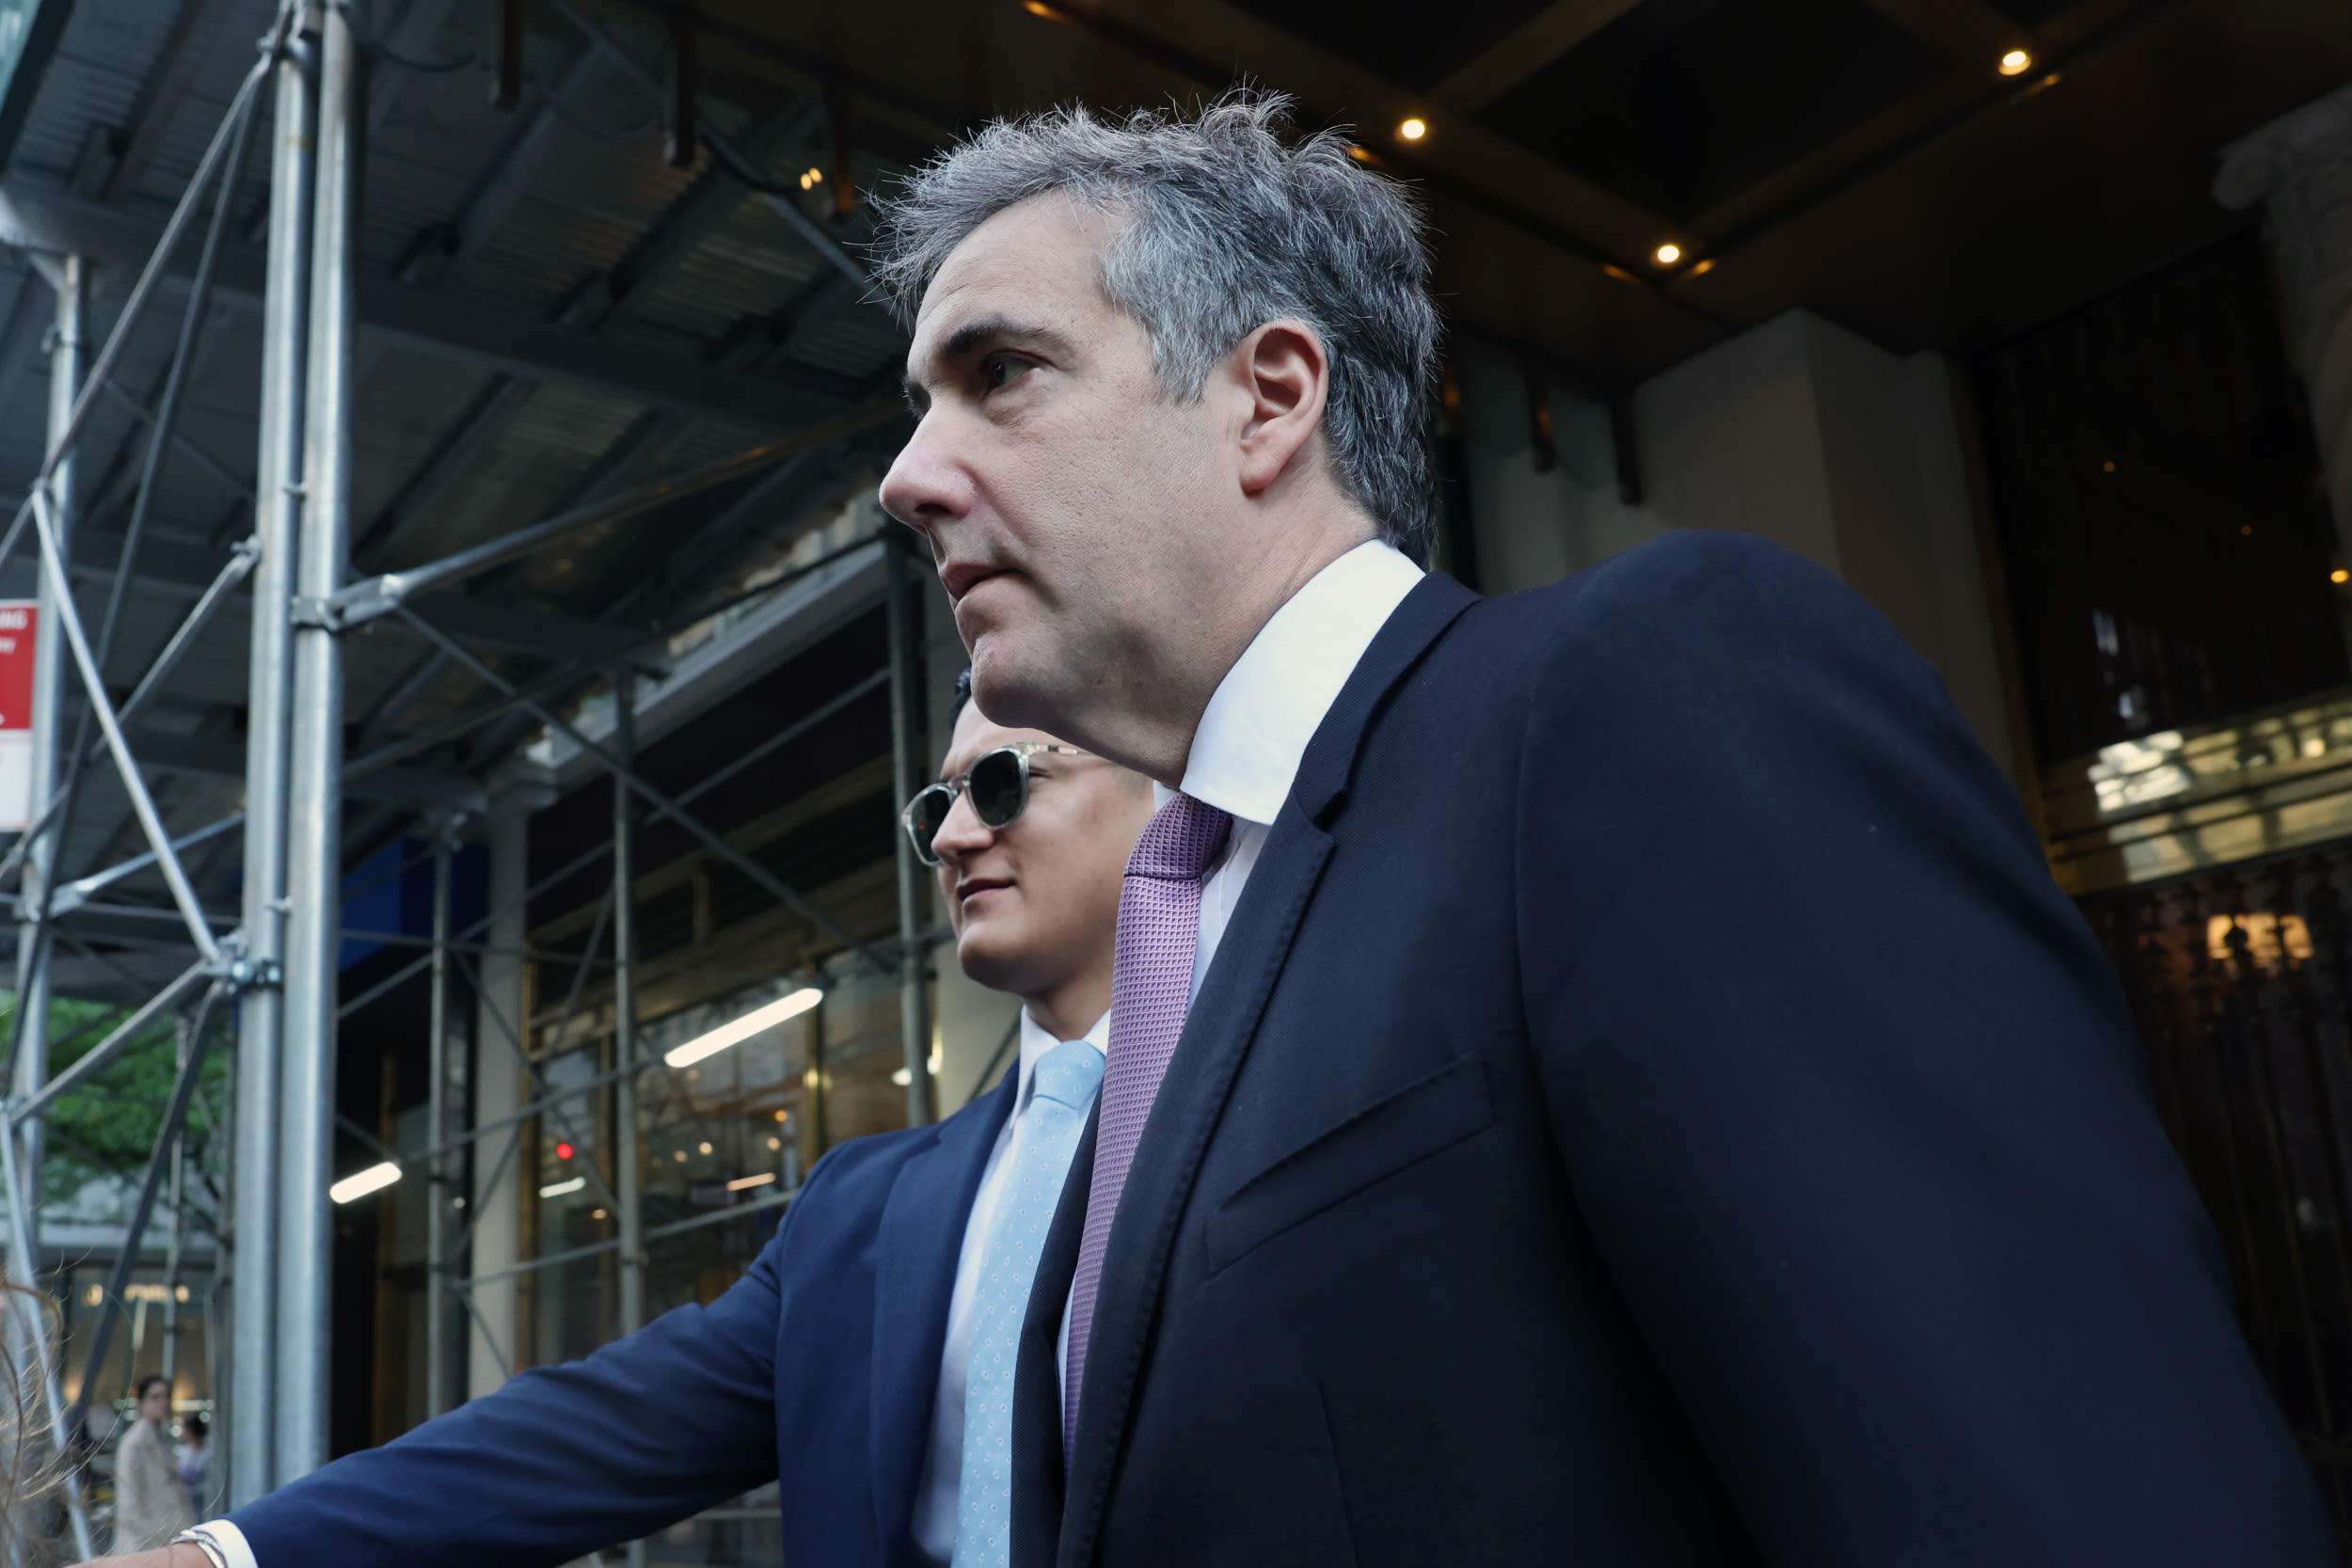 Why Donald Trump may have been put off pardoning Michael Cohen